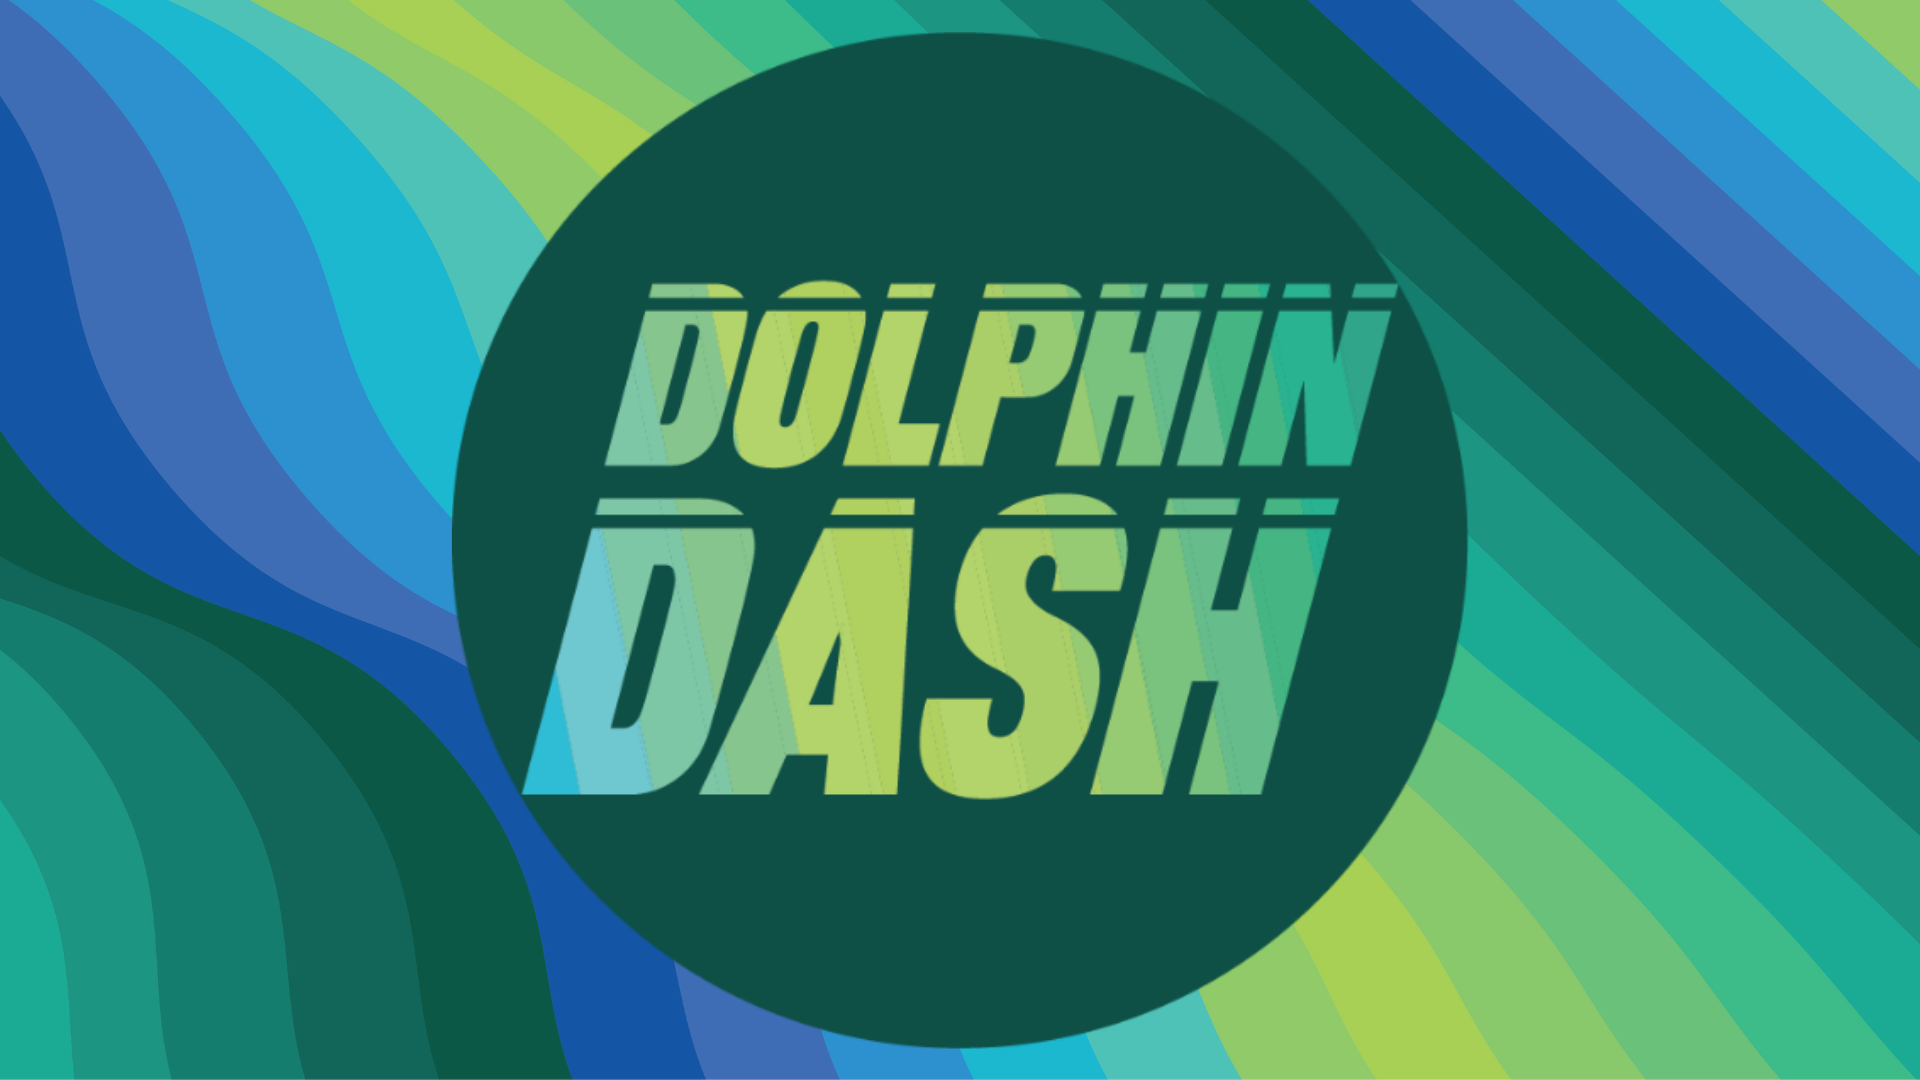 A background image showing the Dolphin Dash logo.